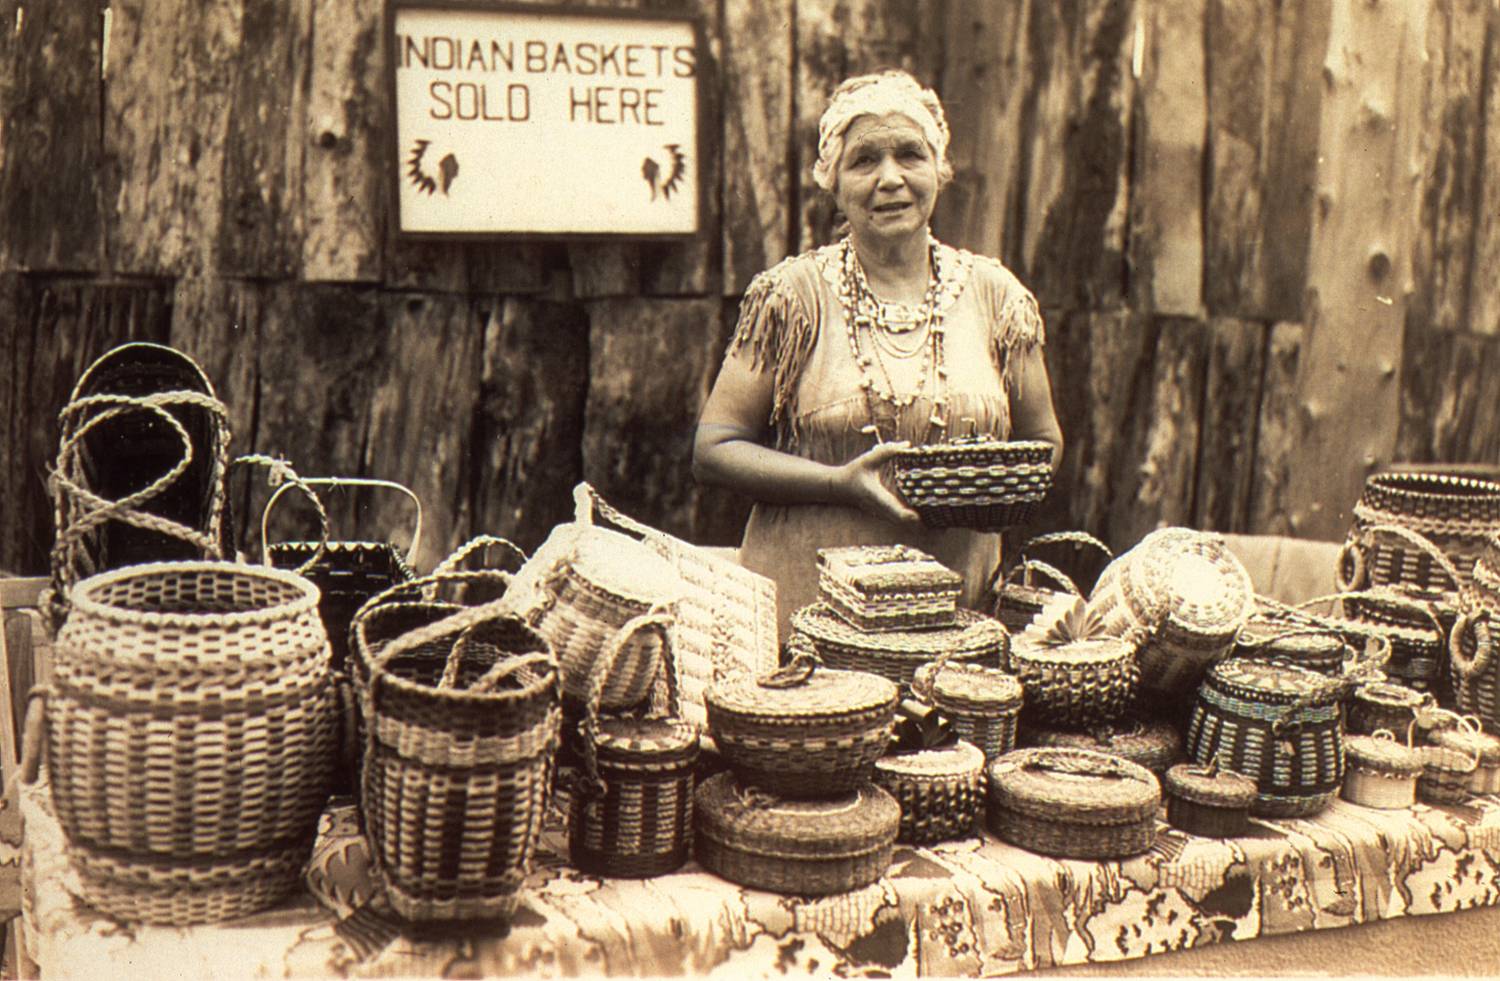 A Penobscot woman stands at a table with a large display of baskets spread out before her. She is holding one proudly in her hand. To the left of her, a sign on a wall of a building behind her says, "Indian Baskets Sold Here."